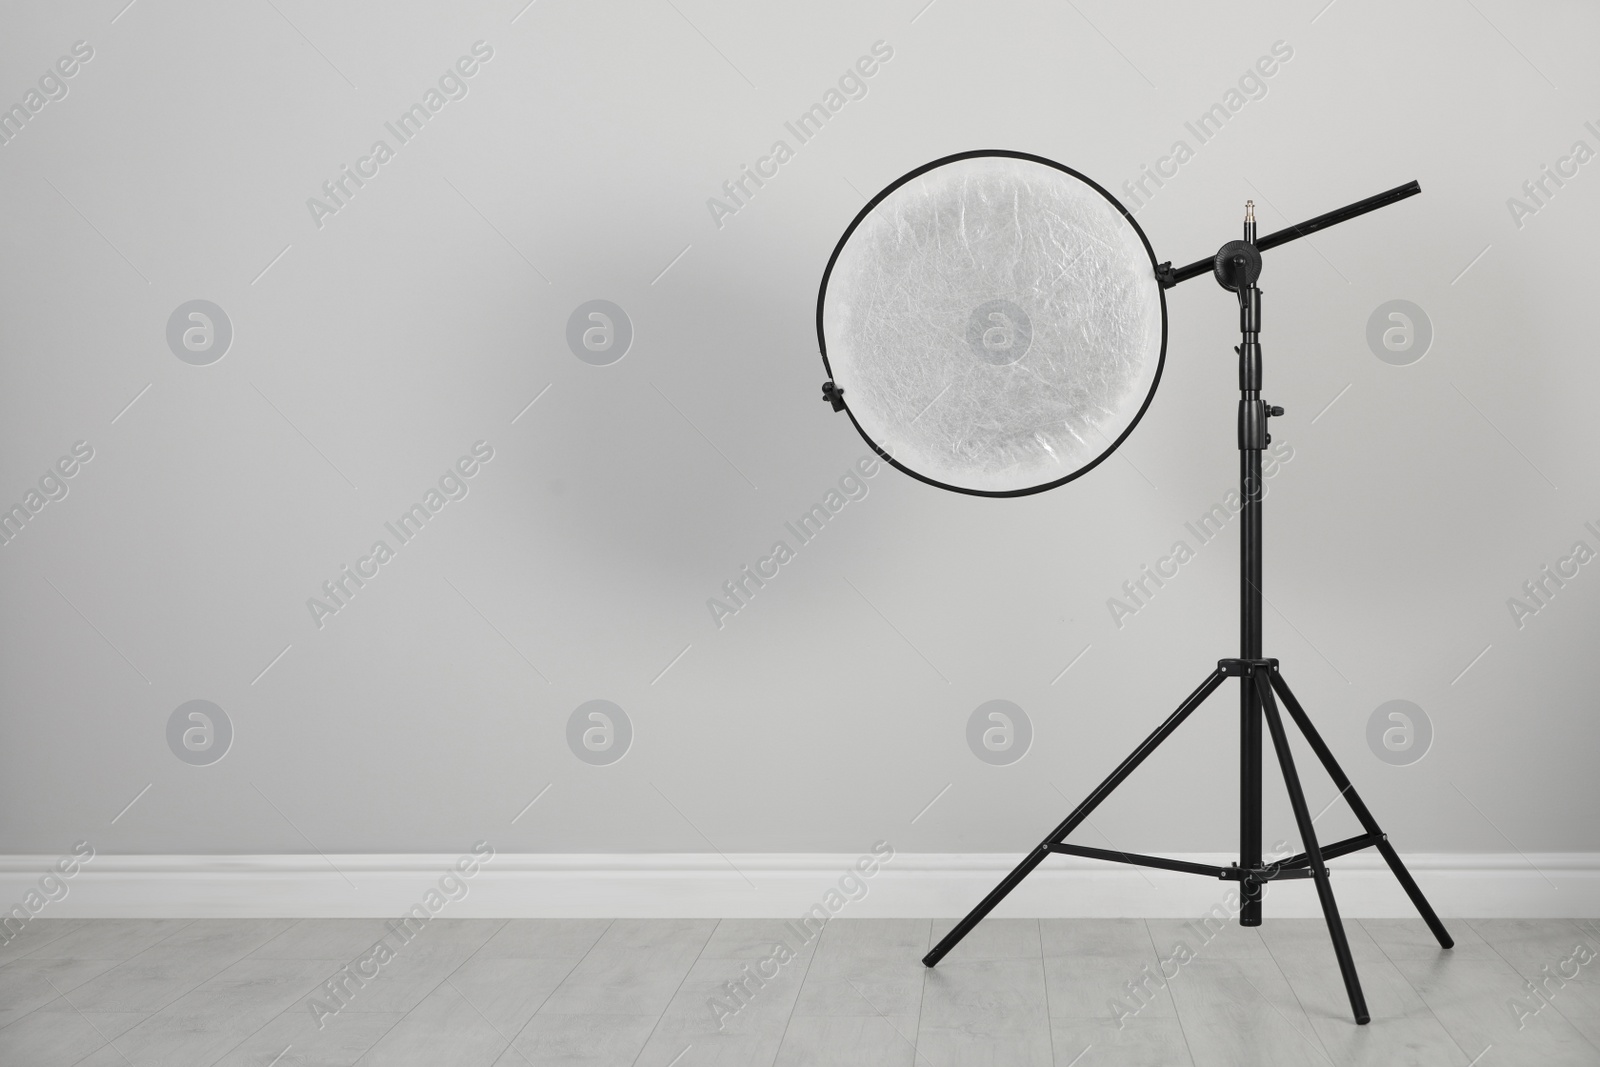 Photo of Studio reflector on tripod near grey wall in room, space for text. Professional photographer's equipment